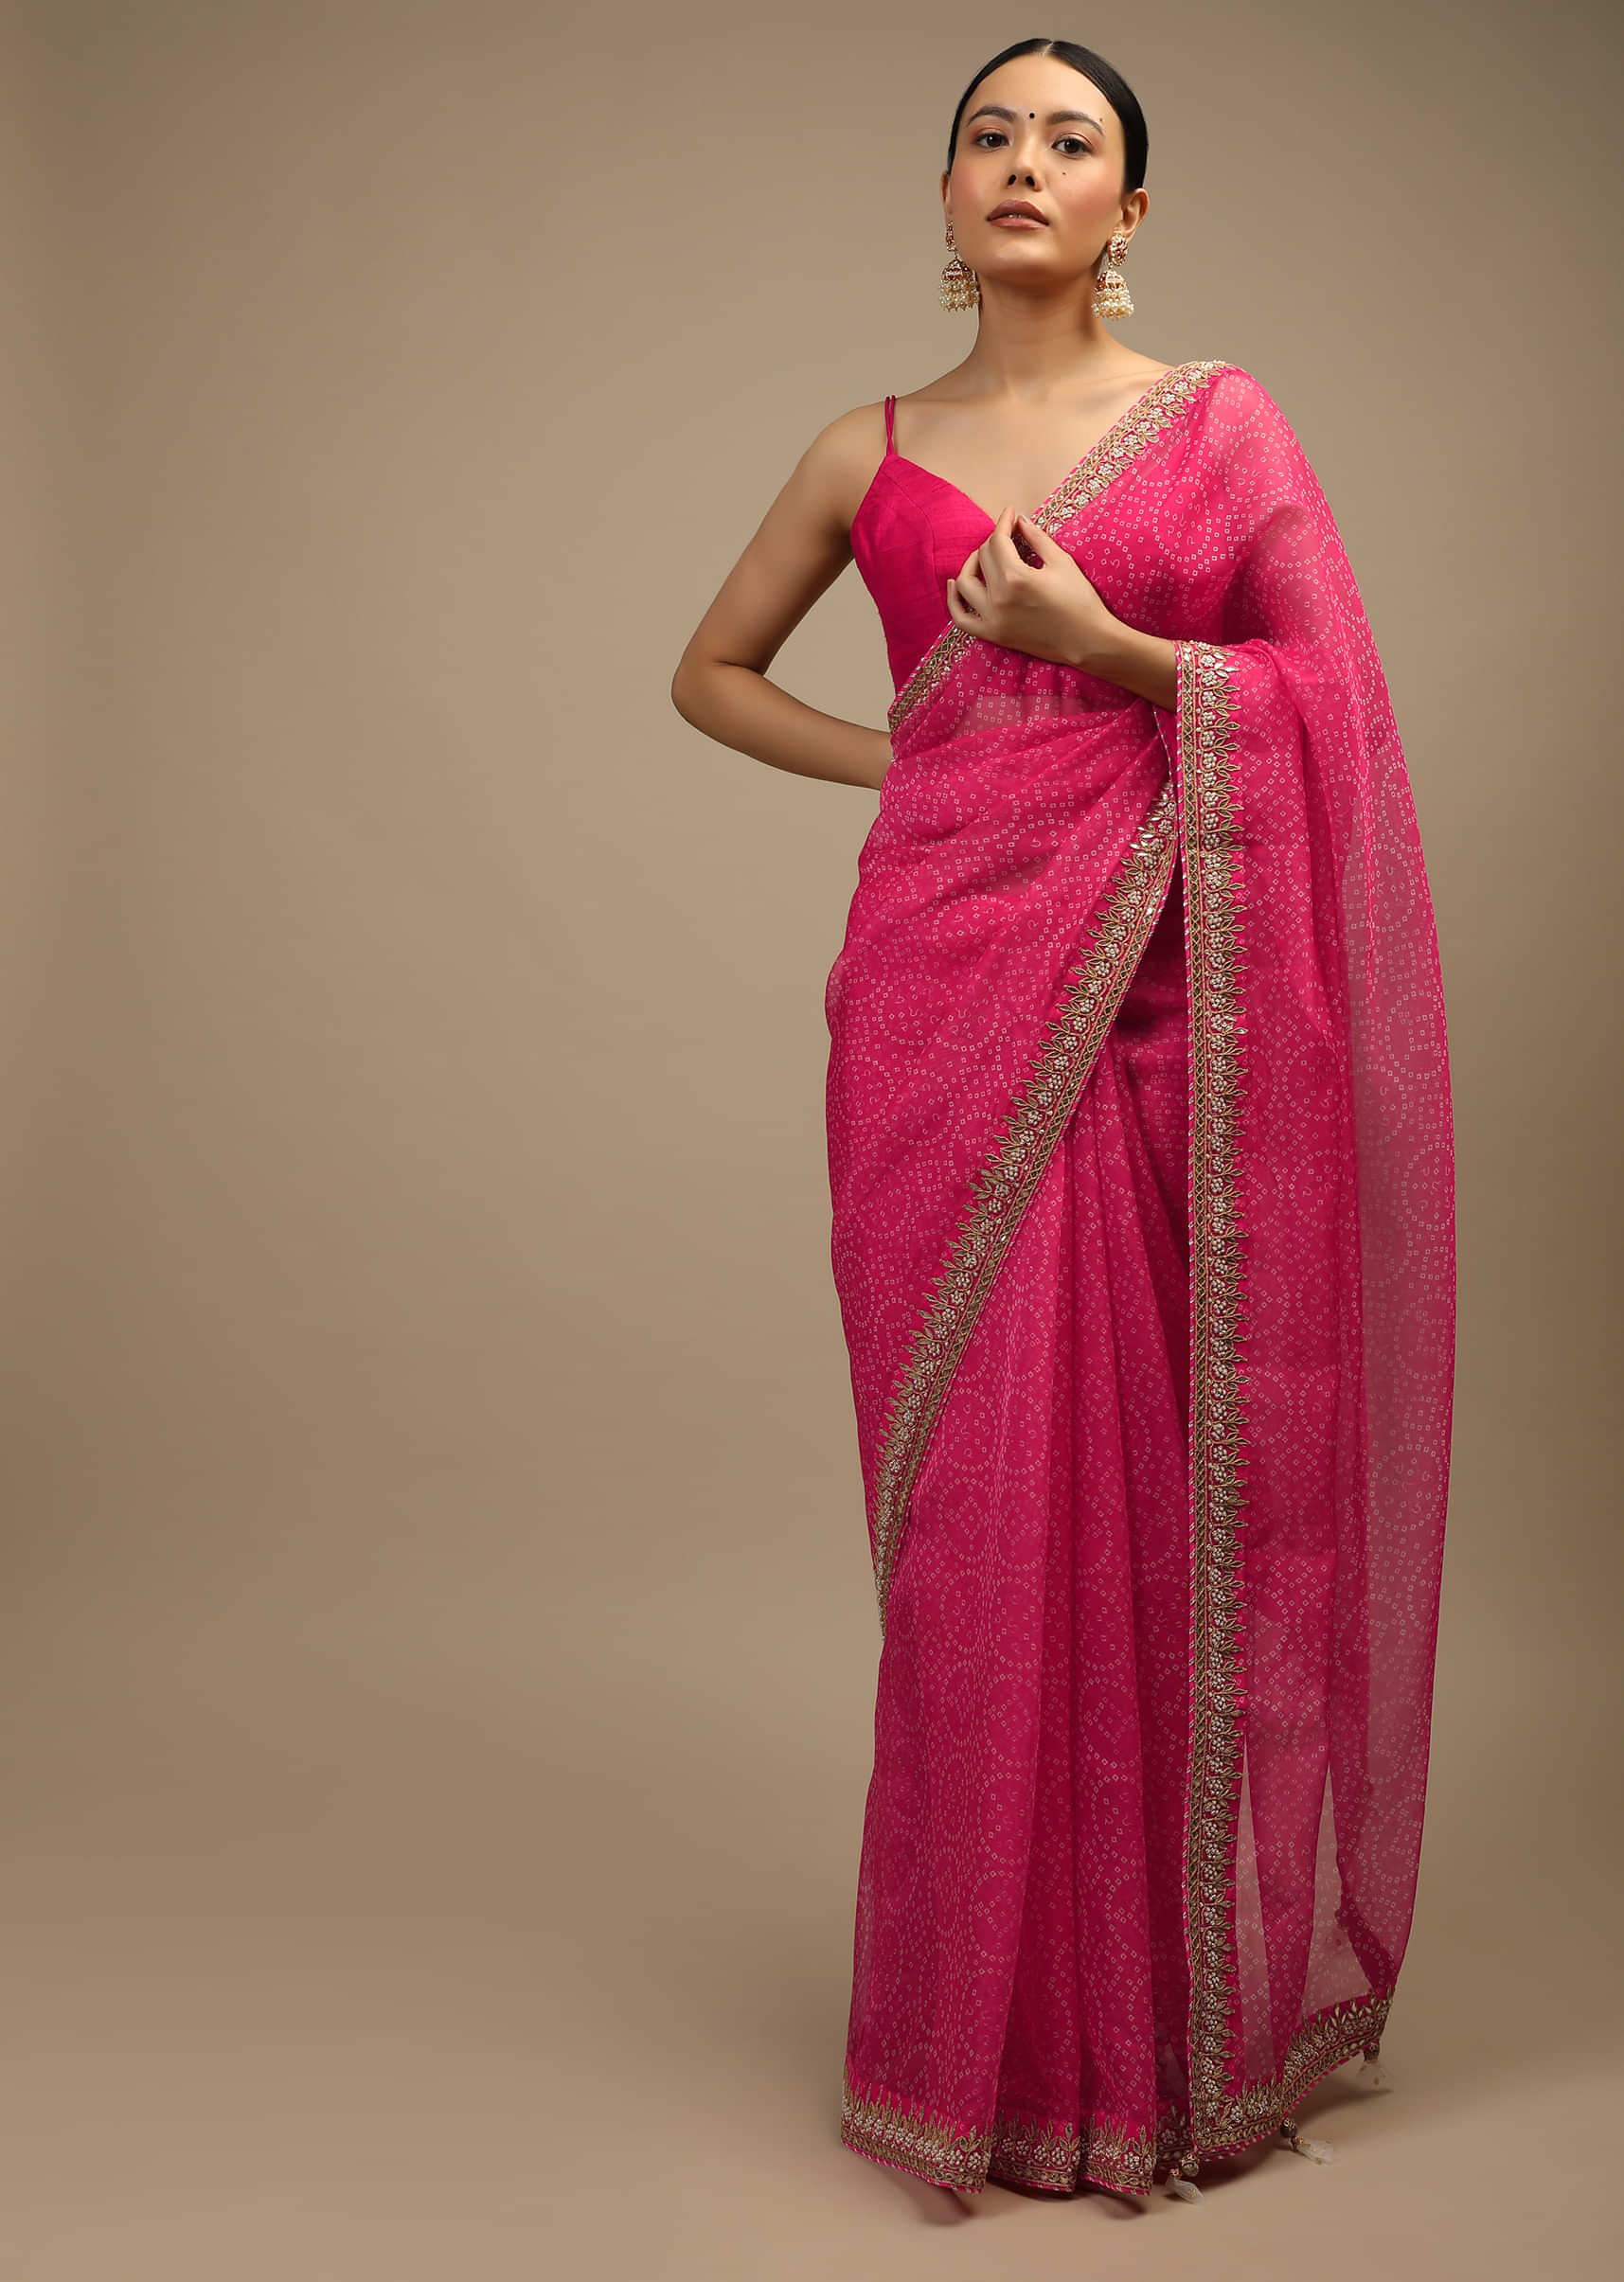 Fuchsia Pink Saree In Organza With Bandhani Jaal And Gotta Patti Embroidered Floral Motifs On The Border  